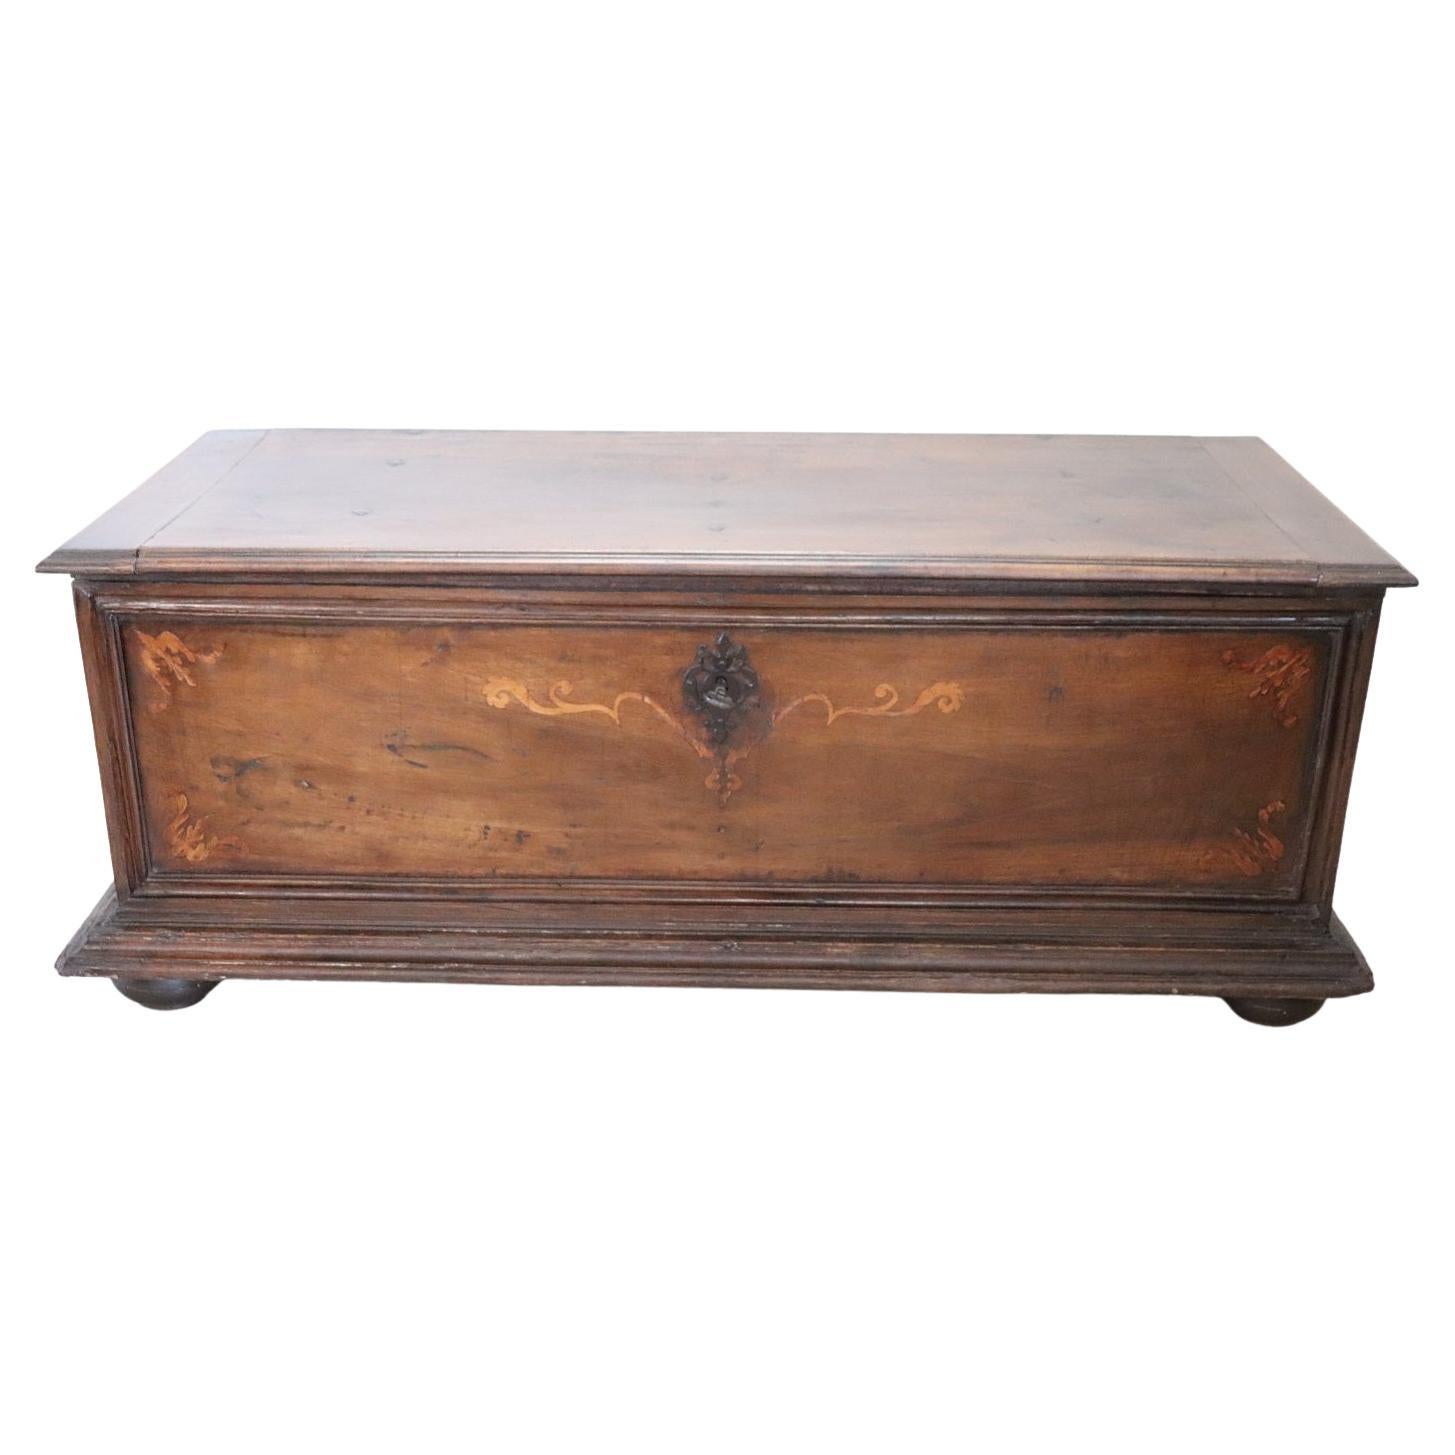 Majestic 17th Century Italian Inlaid Solid Walnut Antique Blanket Chest Restored For Sale